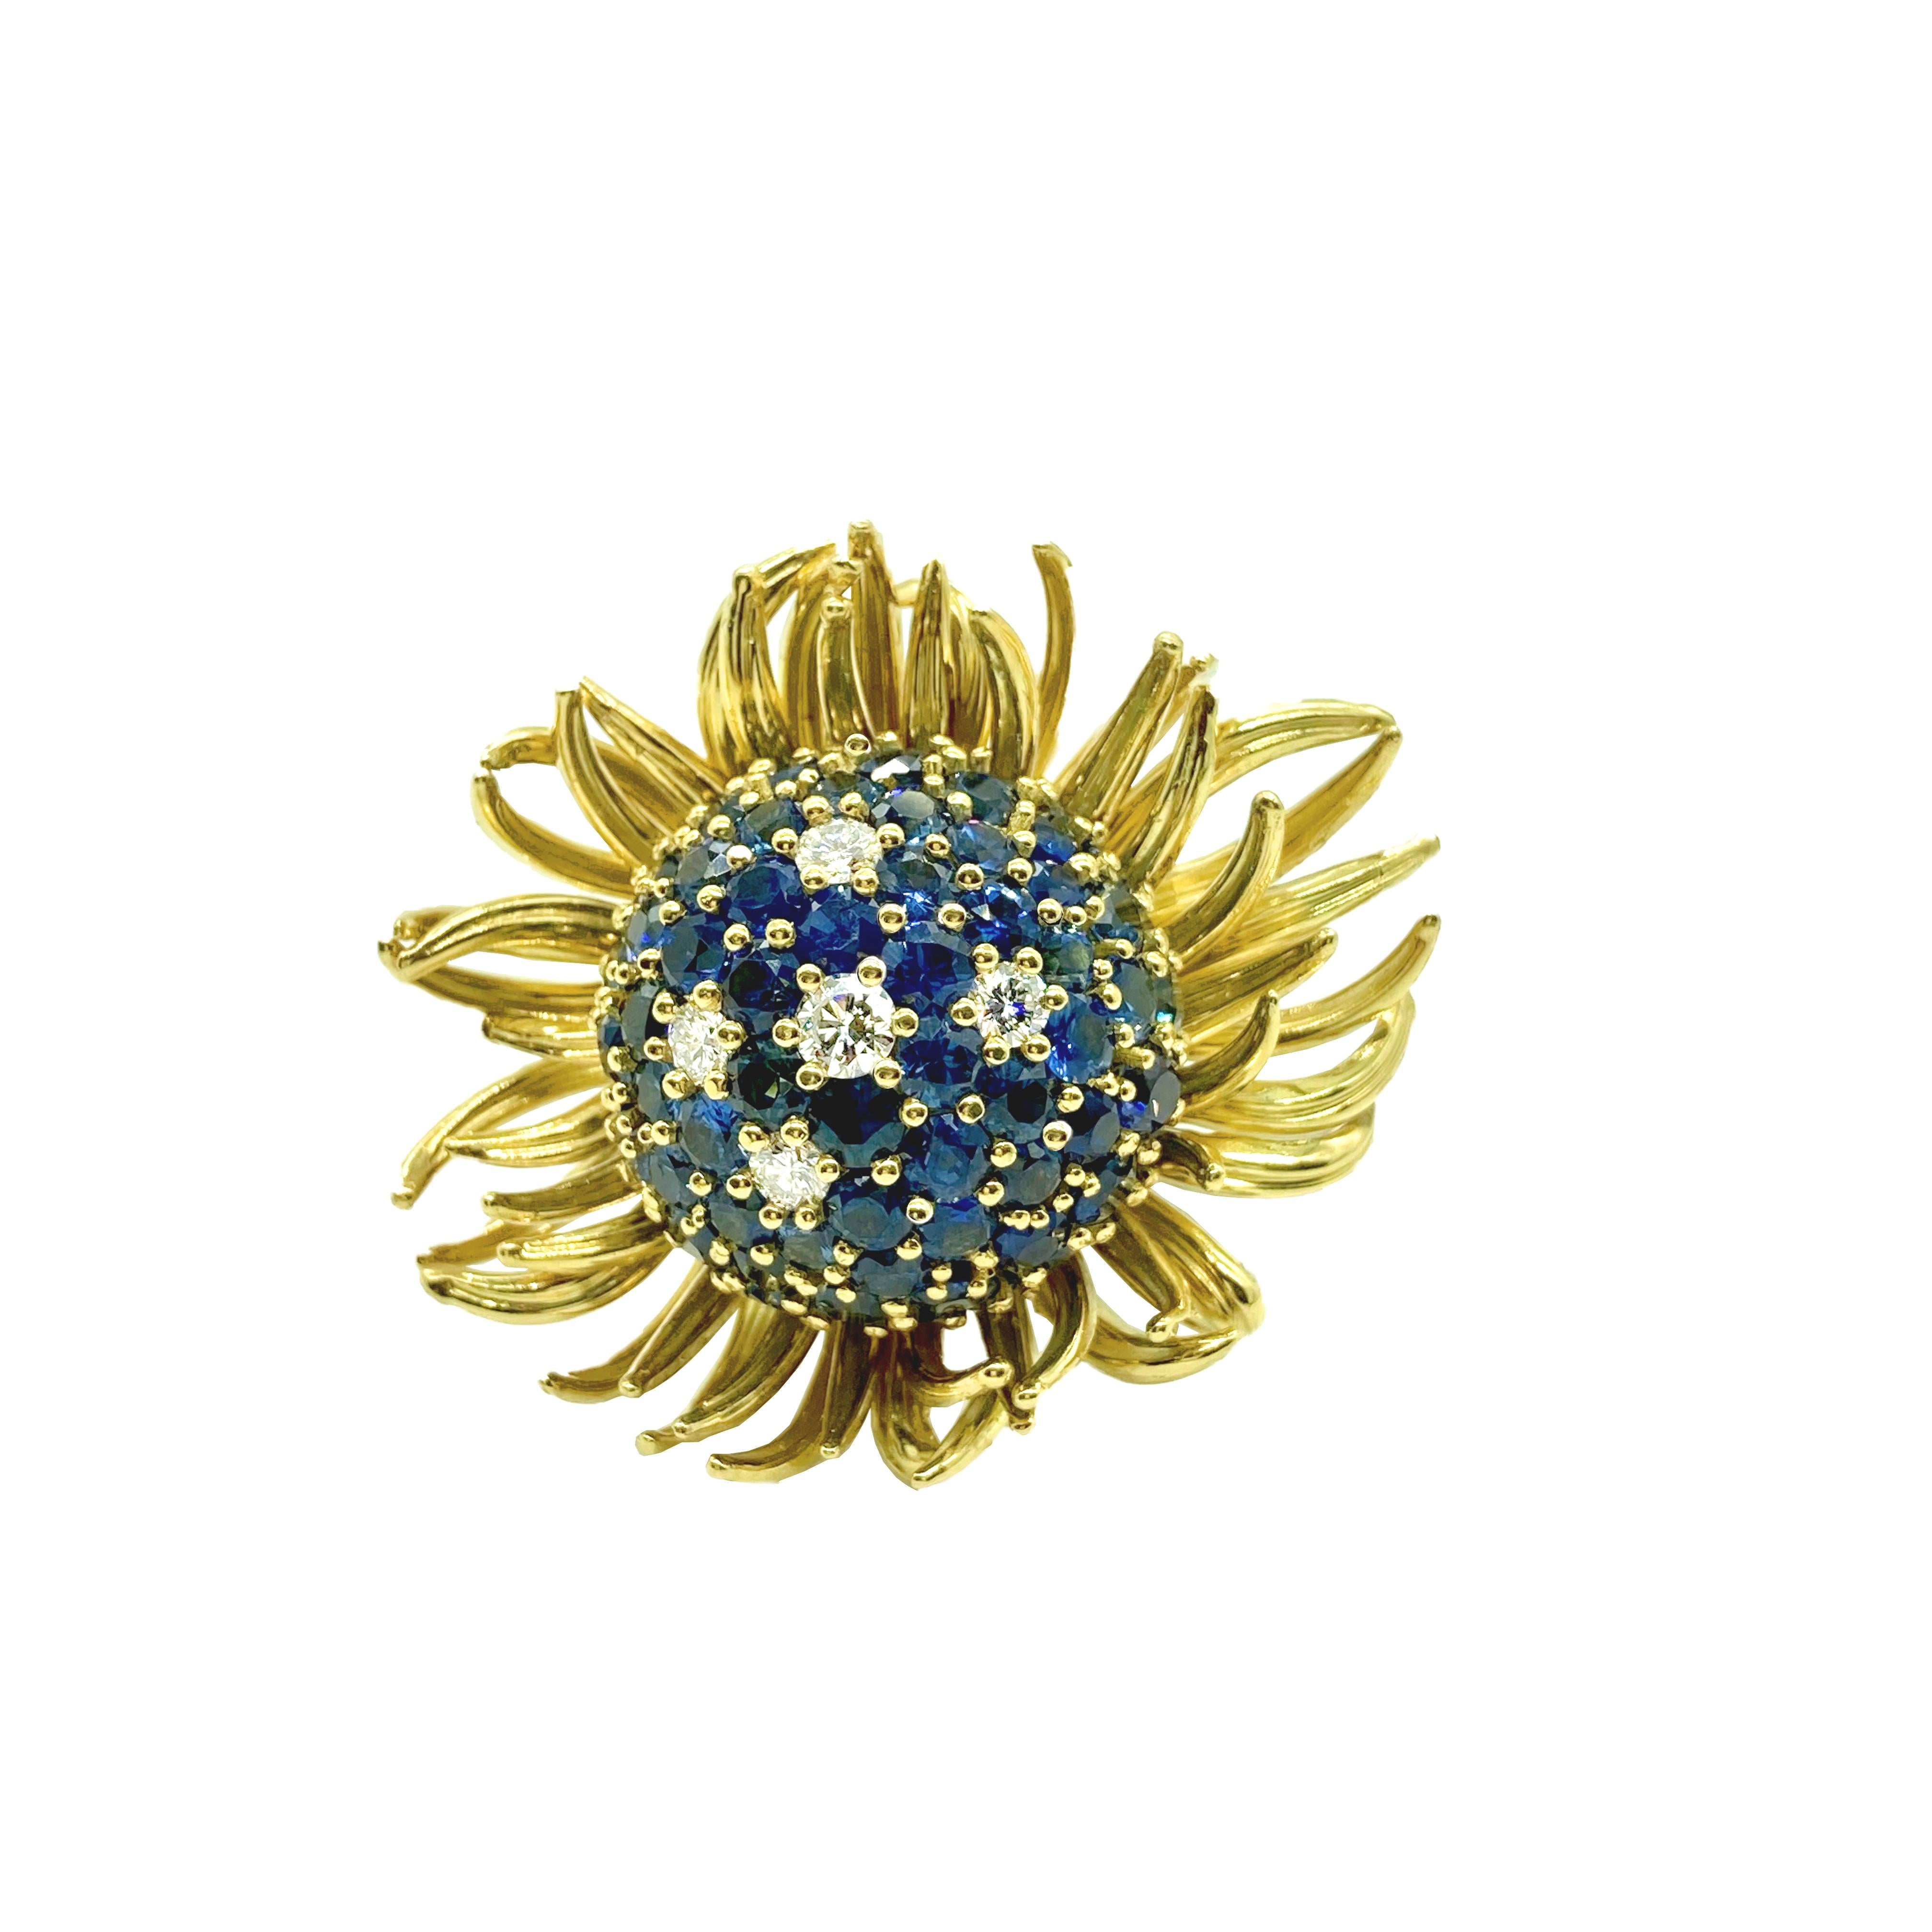 A fun floral cocktail ring featuring a large dome of blue sapphires and diamonds, surrounded by yellow gold petals. 